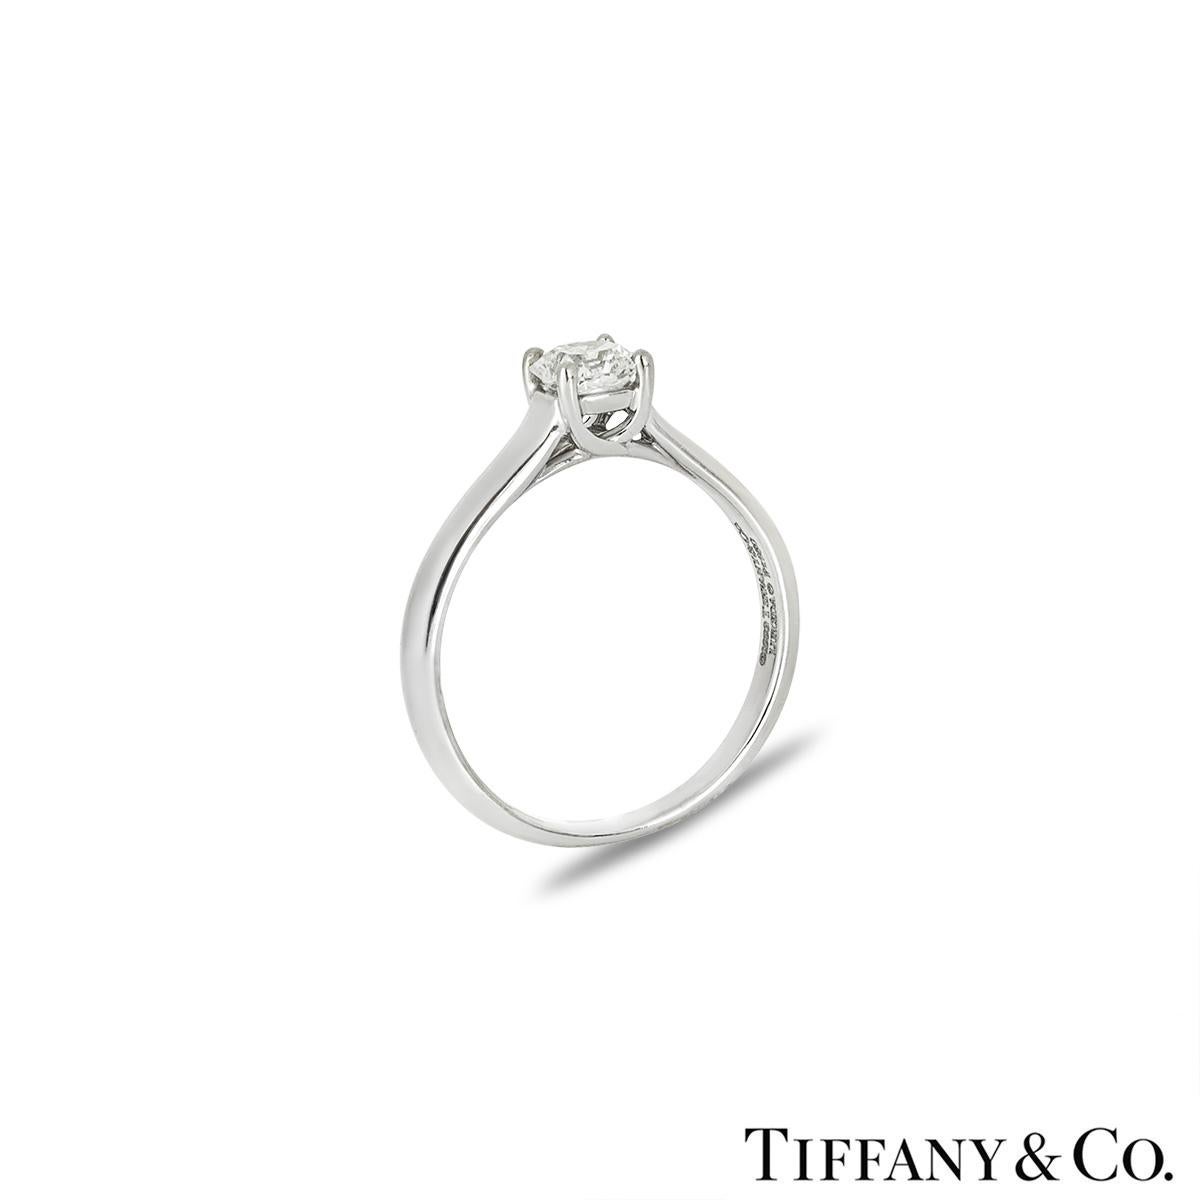 A lovely platinum Tiffany & Co. diamond ring from the Lucida collection. The solitaire ring comprises of a Lucida cut diamond in a 4 claw setting with a weight of 0.53ct, H colour and VVS1 clarity. The 2.8mm ring has a gross weight of 4.29 grams and